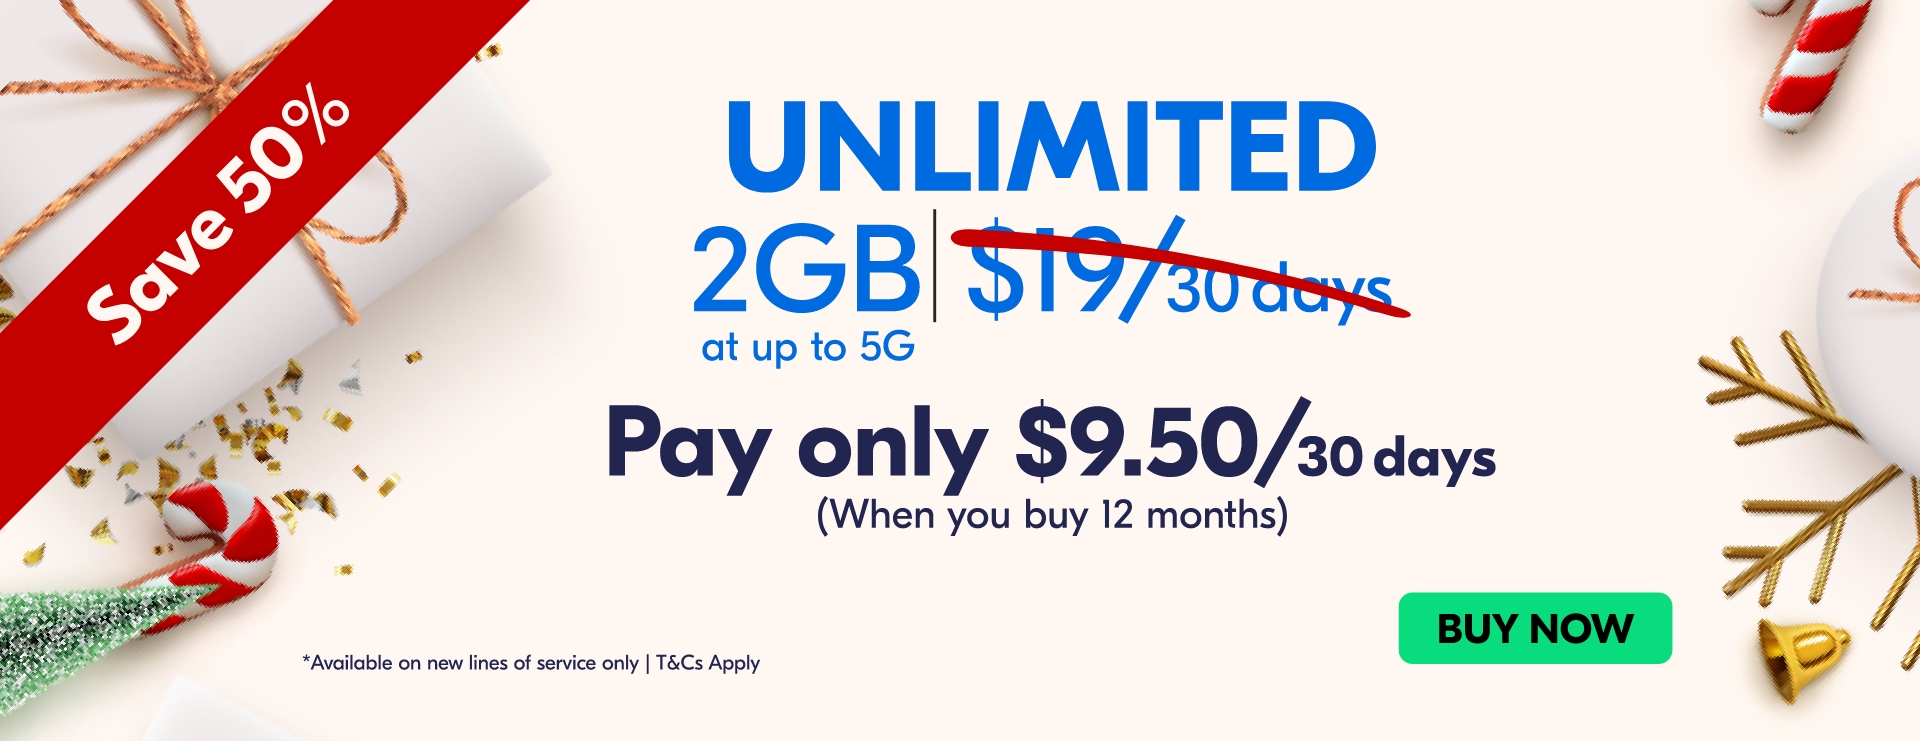 The best data plans and sim only deals – Lyca Mobile包年套餐